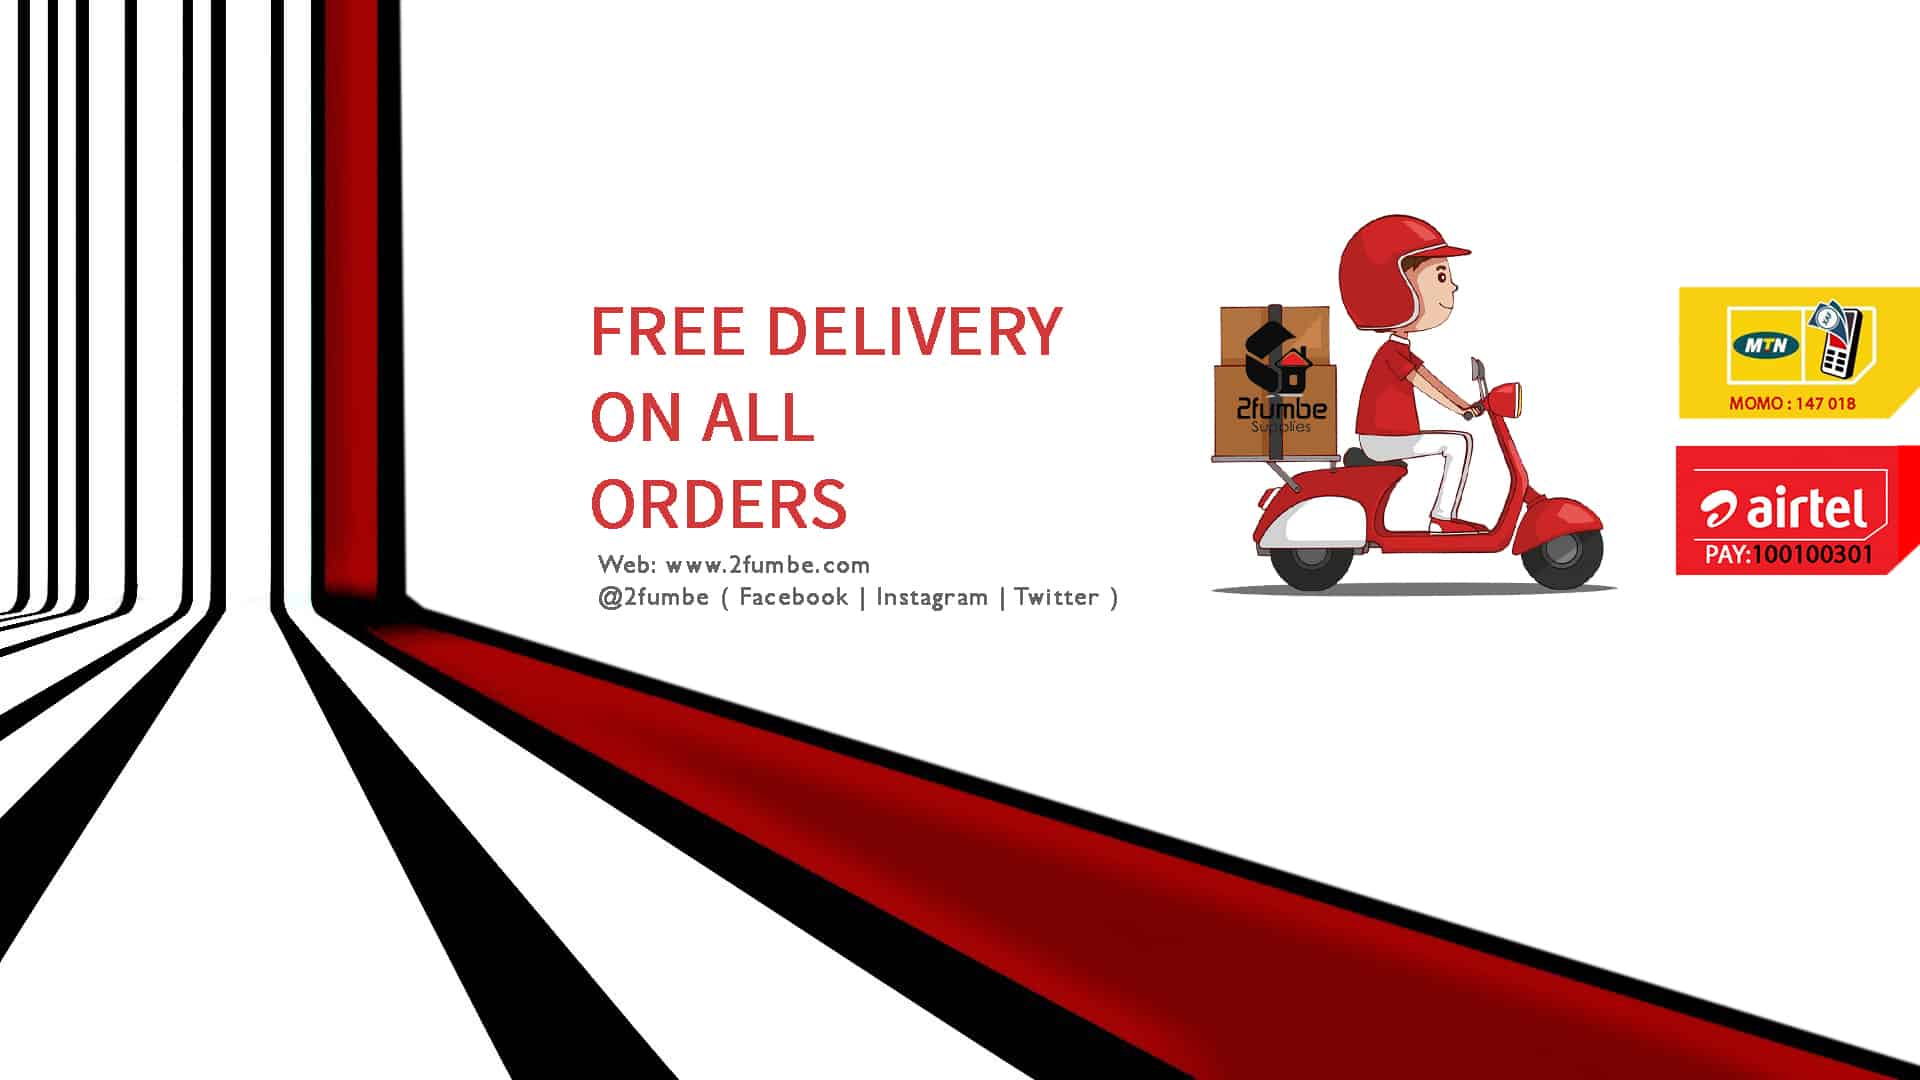 2fumbe-free delivery on orders